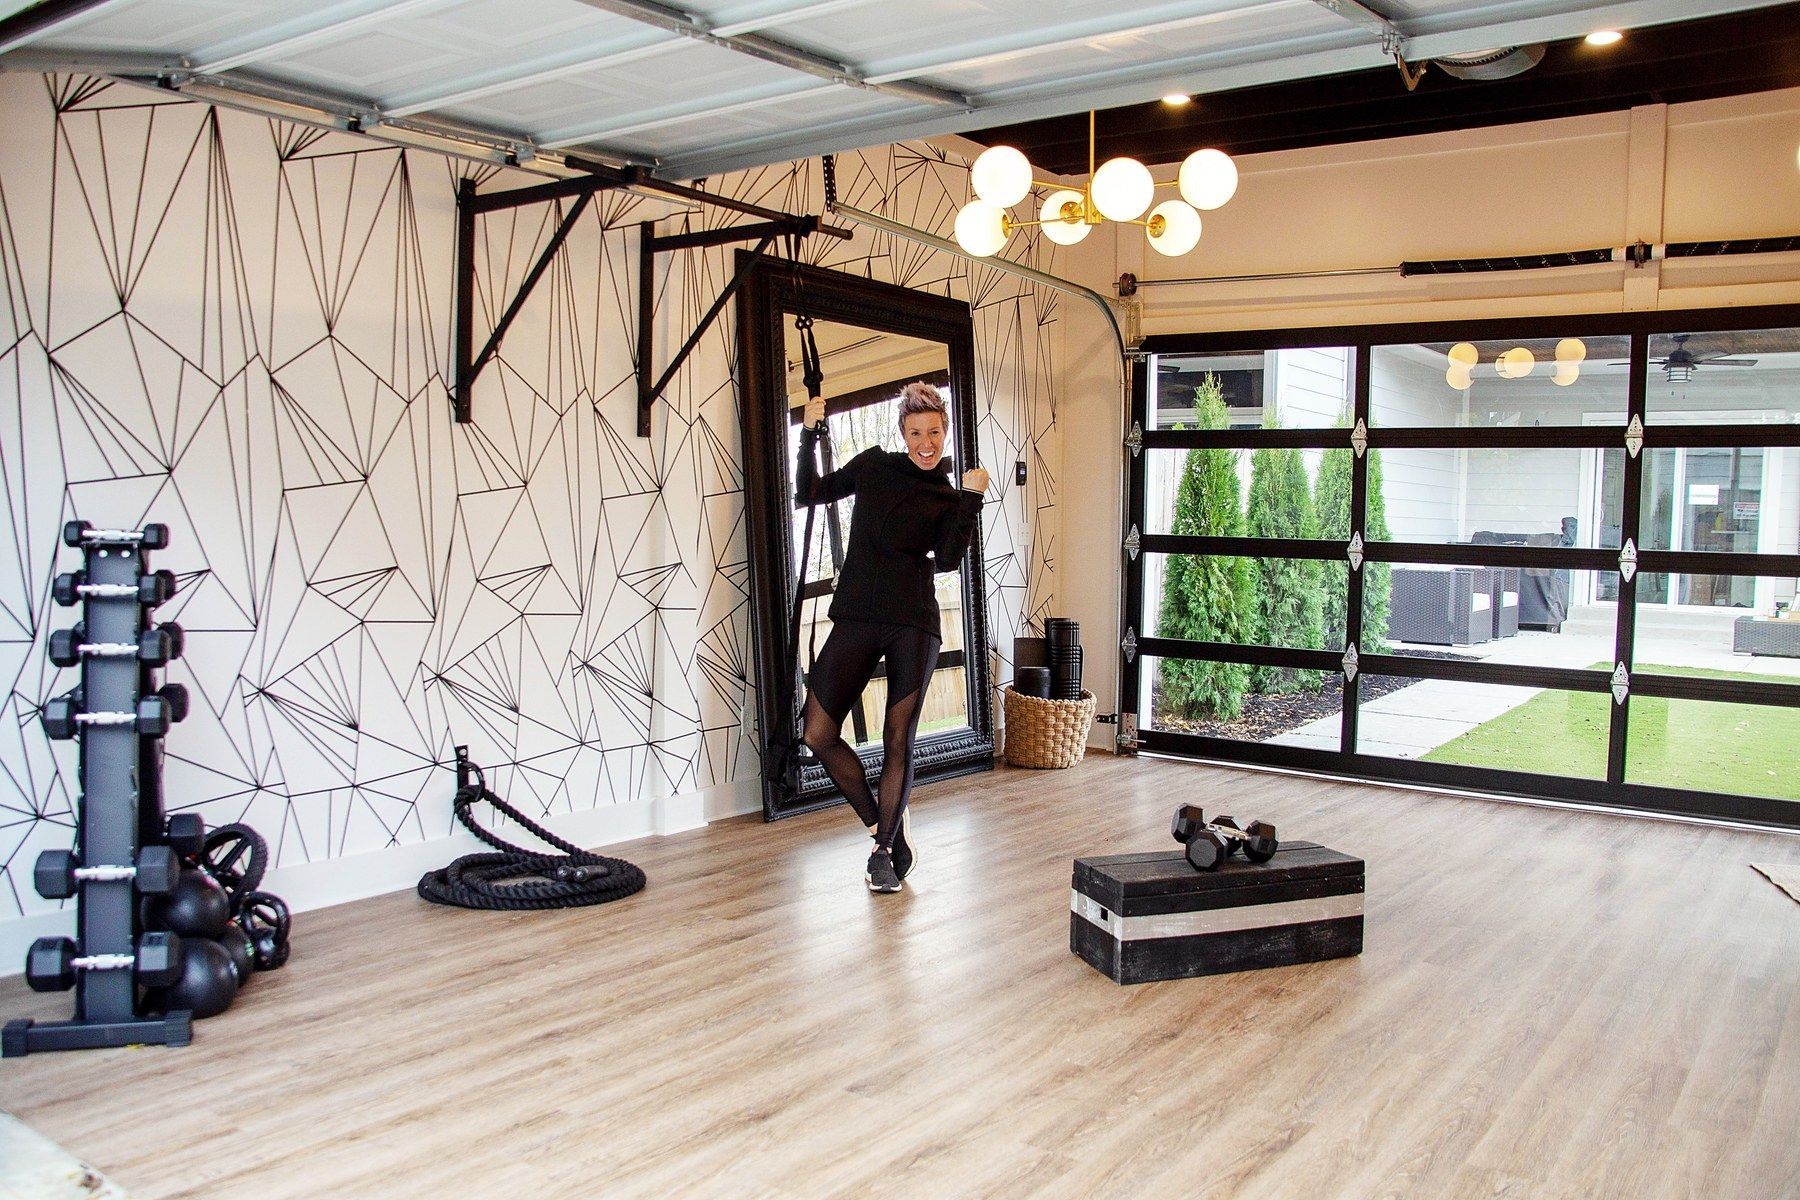 Build a Budget-Friendly At-Home Gym With These Tips From Celebrity Trainer Erin Oprea | SELF - Build a Budget-Friendly At-Home Gym With These Tips From Celebrity Trainer Erin Oprea | SELF -   25 fitness Room door ideas